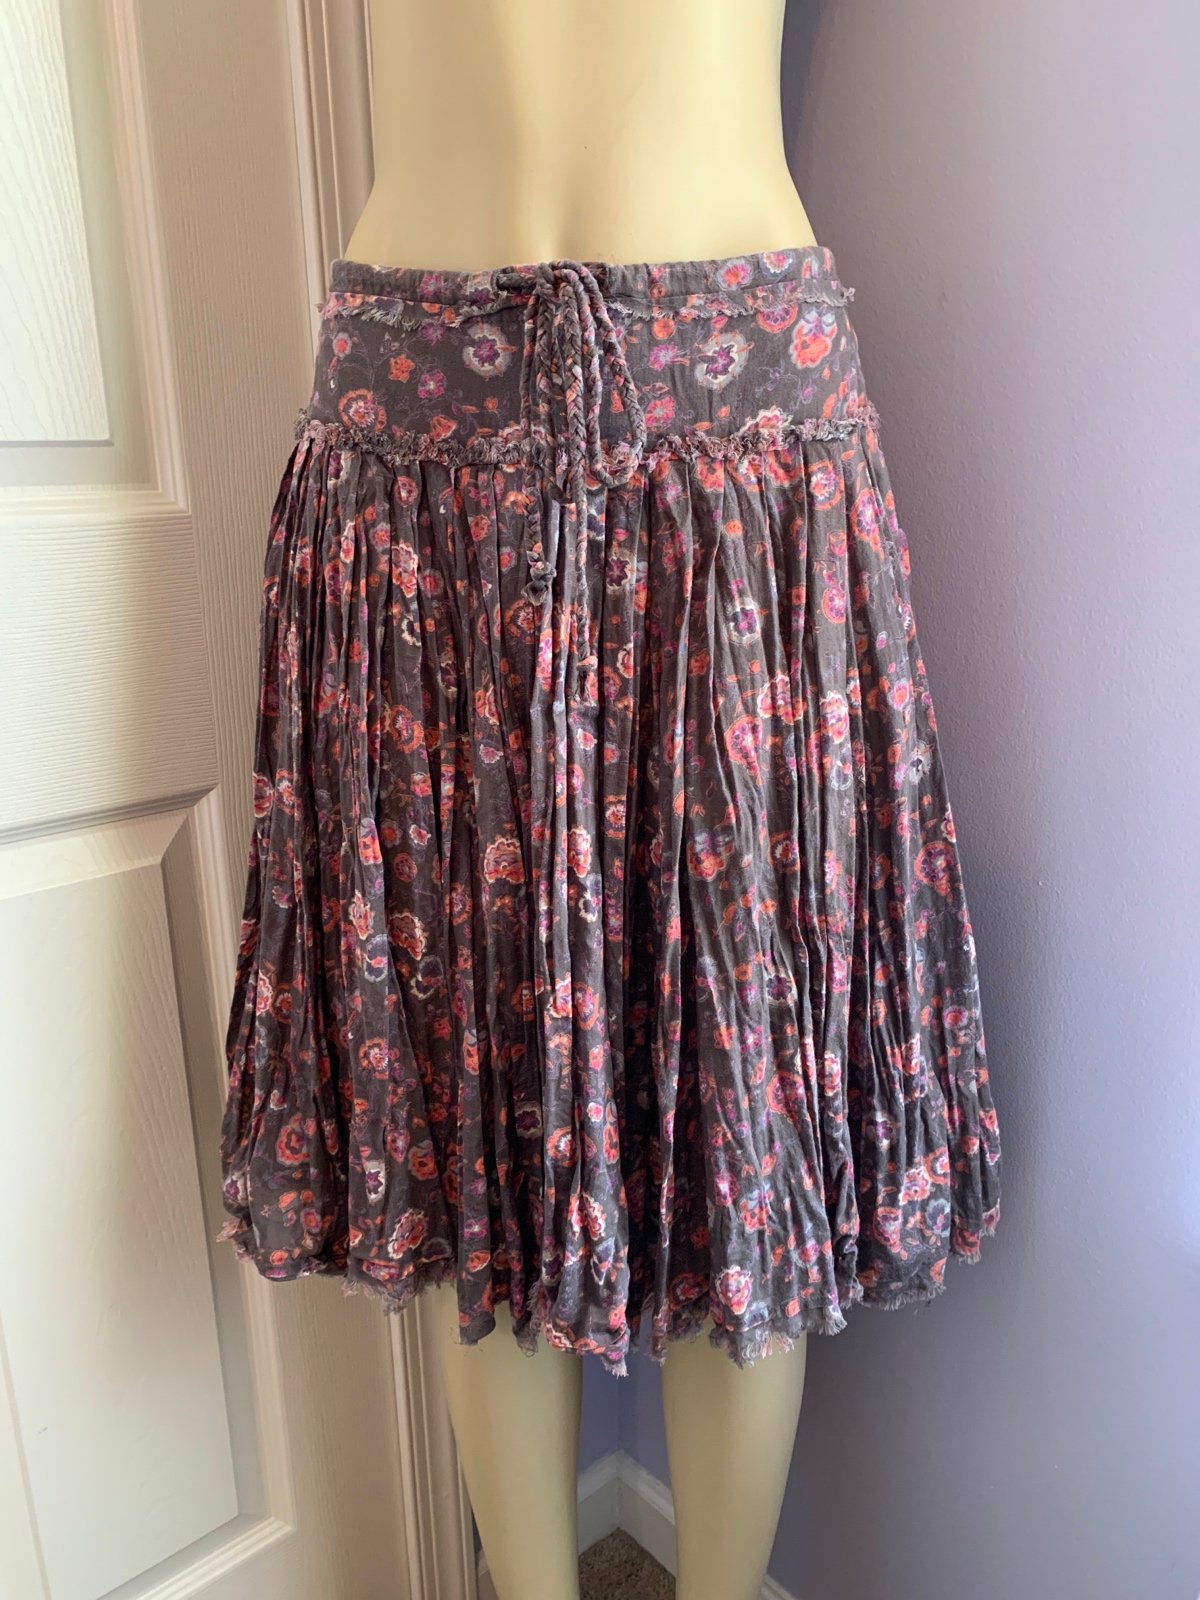 big discount American Eagle Outfitters Crinkle Fun Flirty Casual Skirt XS pIVFaUhq4 Low Price